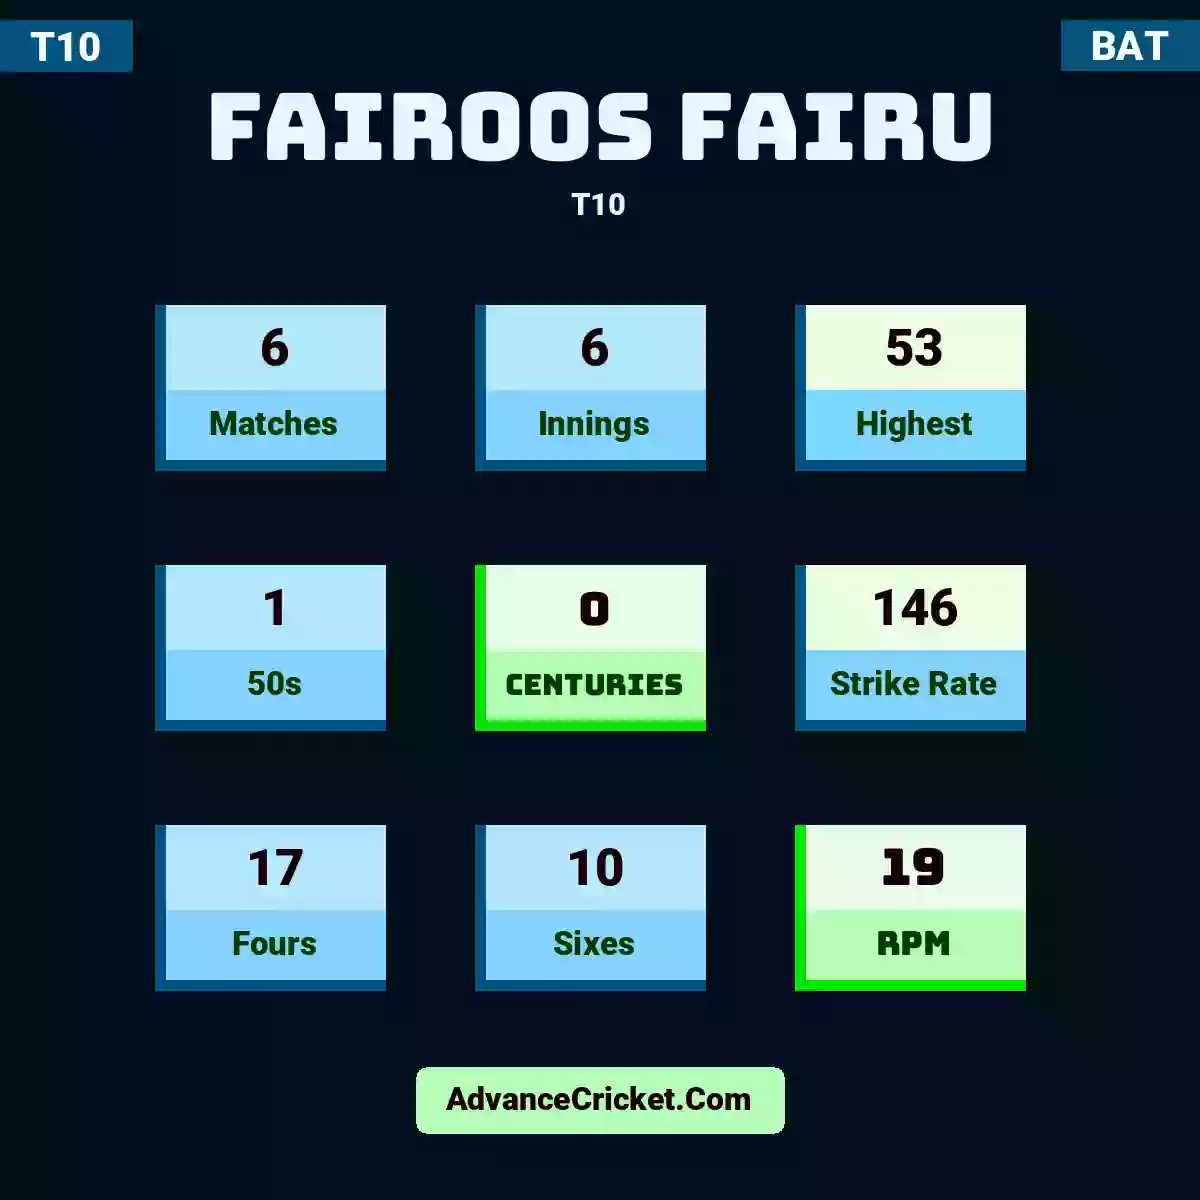 Fairoos Fairu T10 , Fairoos Fairu played 6 matches, scored 53 runs as highest, 1 half-centuries, and 0 centuries, with a strike rate of 146. F.Fairu hit 17 fours and 10 sixes, with an RPM of 19.